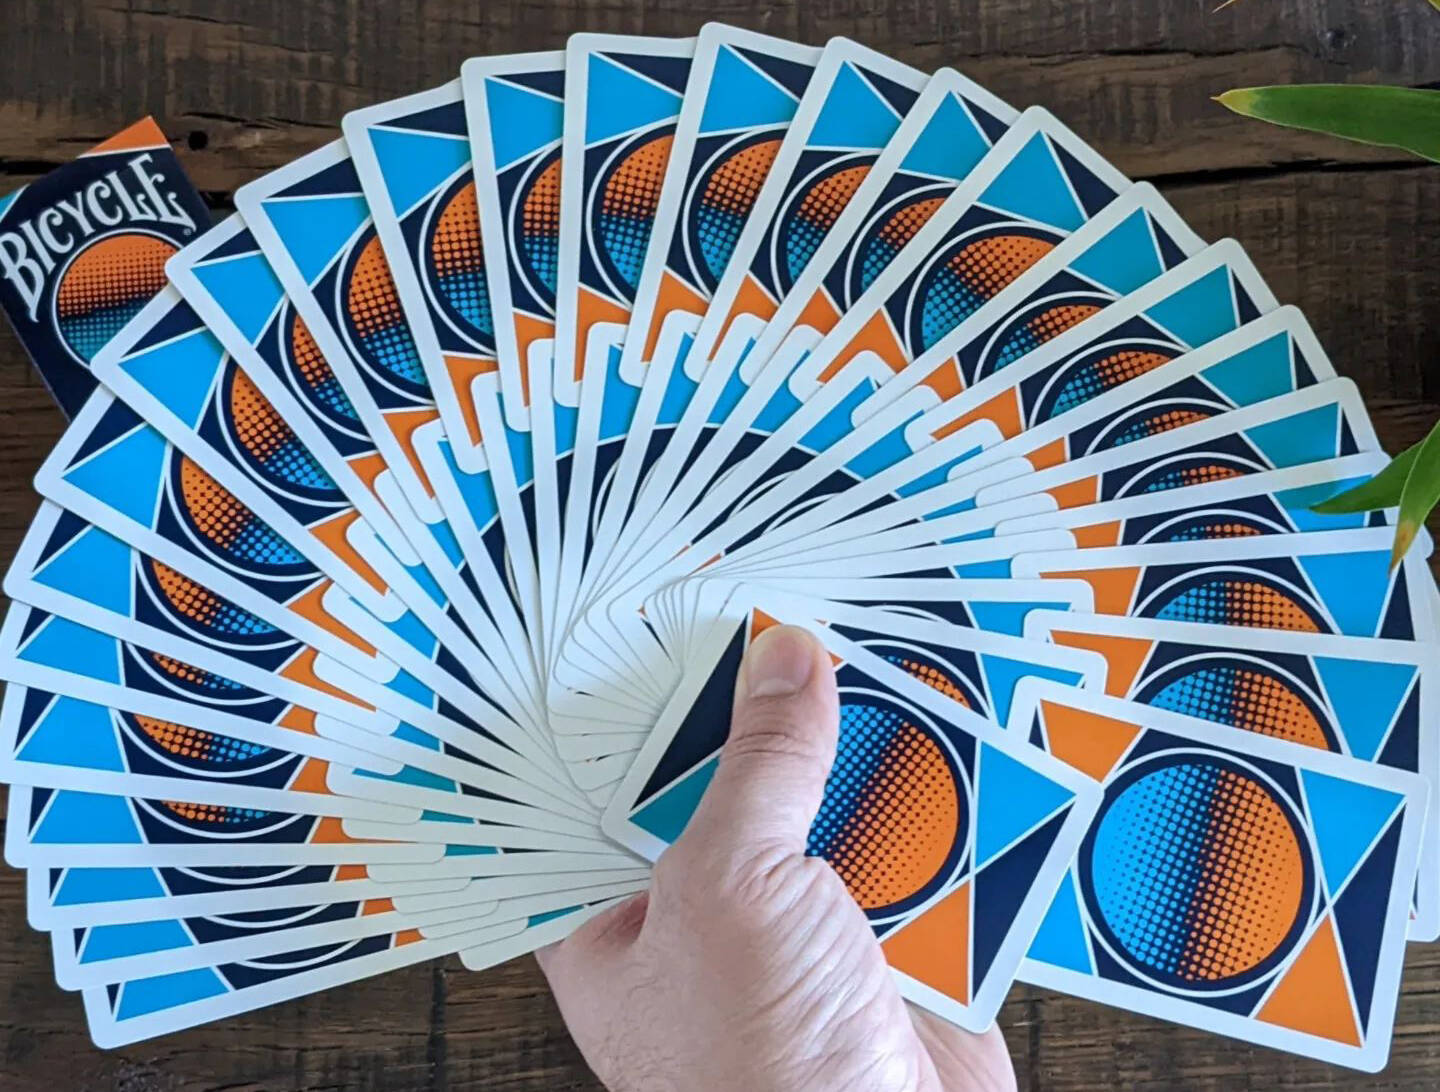 Giant fan of the Bicycle Amplified Playing Cards